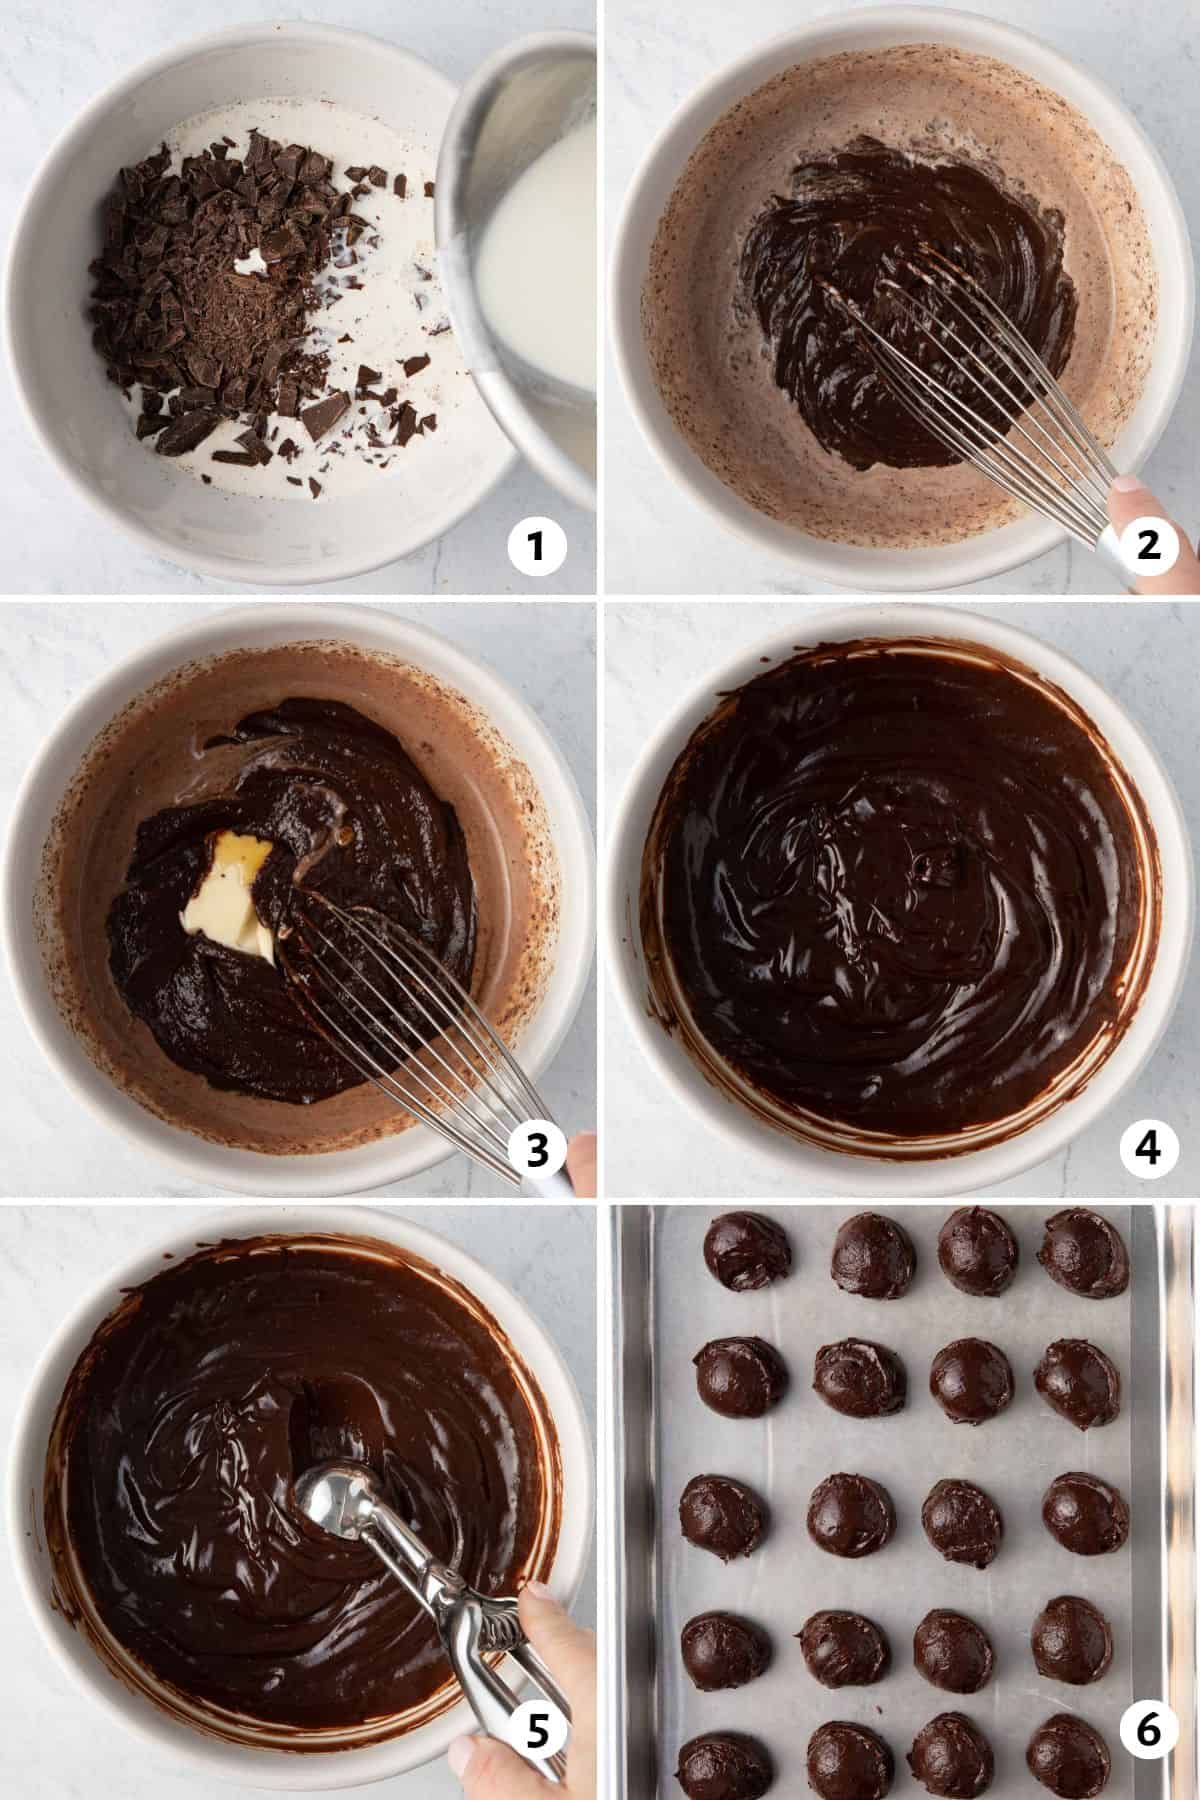 6 image collage making recipe: 1- finely chopped chocolate in a bowl with warm milk being poured over, 2- whisking together, 3- butter added, 4- ganache after being mixed, 5- spring scoop scooping up ganache, 6- balls on a lined baking sheet.